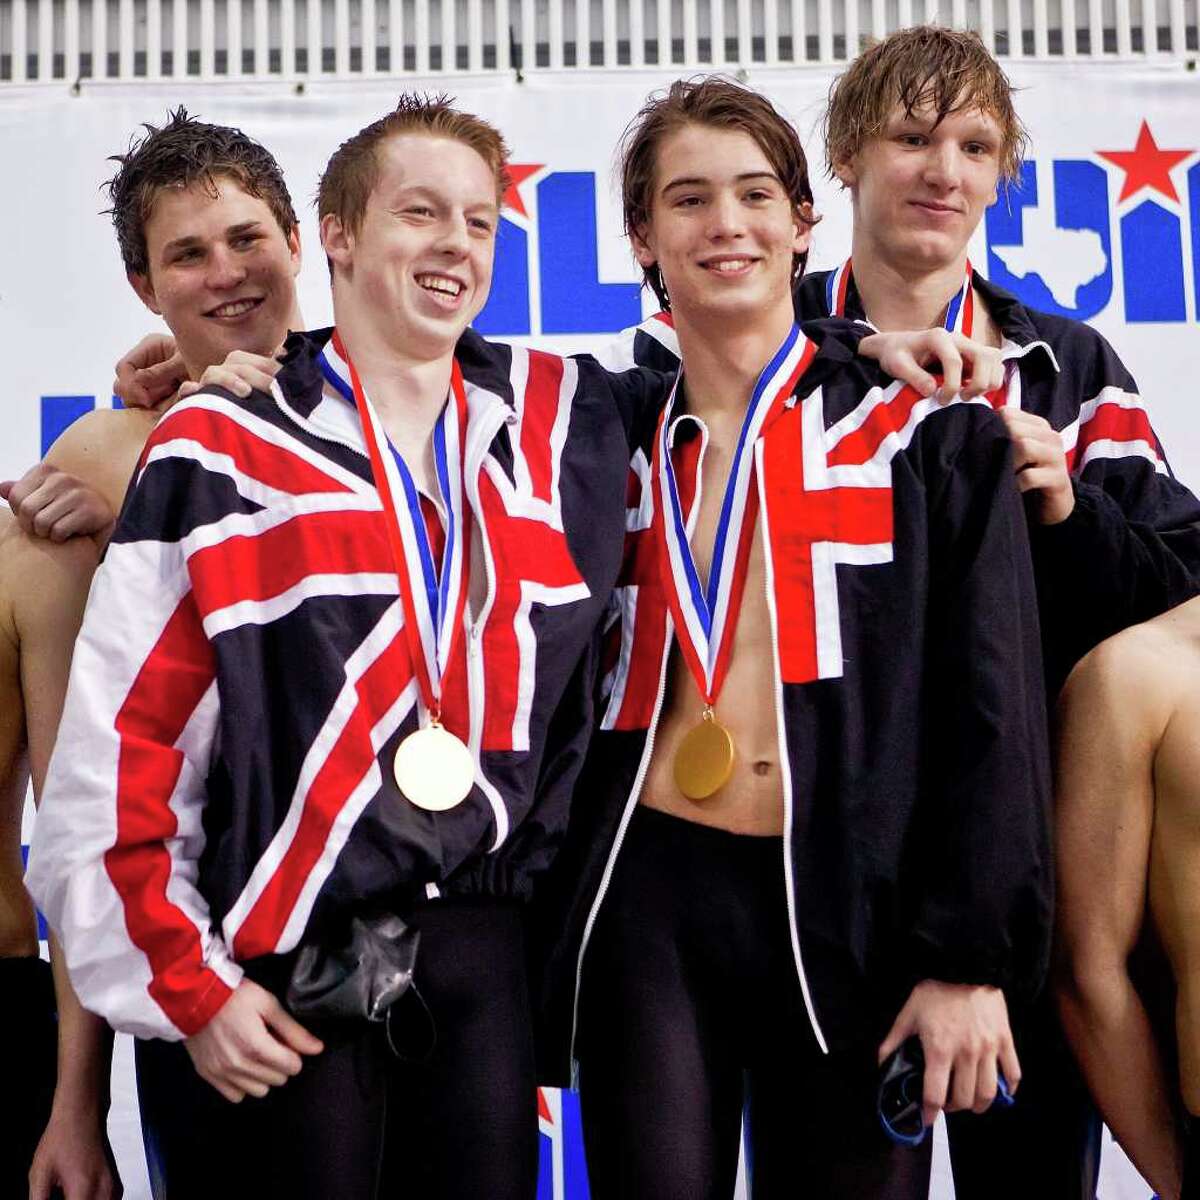 Churschill's boys' 200-yard medley relay team — John Murray (from left), William Glasscock, Liam Lockwood and Dory Boleter — collect their gold medals on the medal stand in the finals of the 5A Swimming and Diving State Meet at the Jamail Texas Swim Center in Austin on Saturday, Feb. 25, 2012.